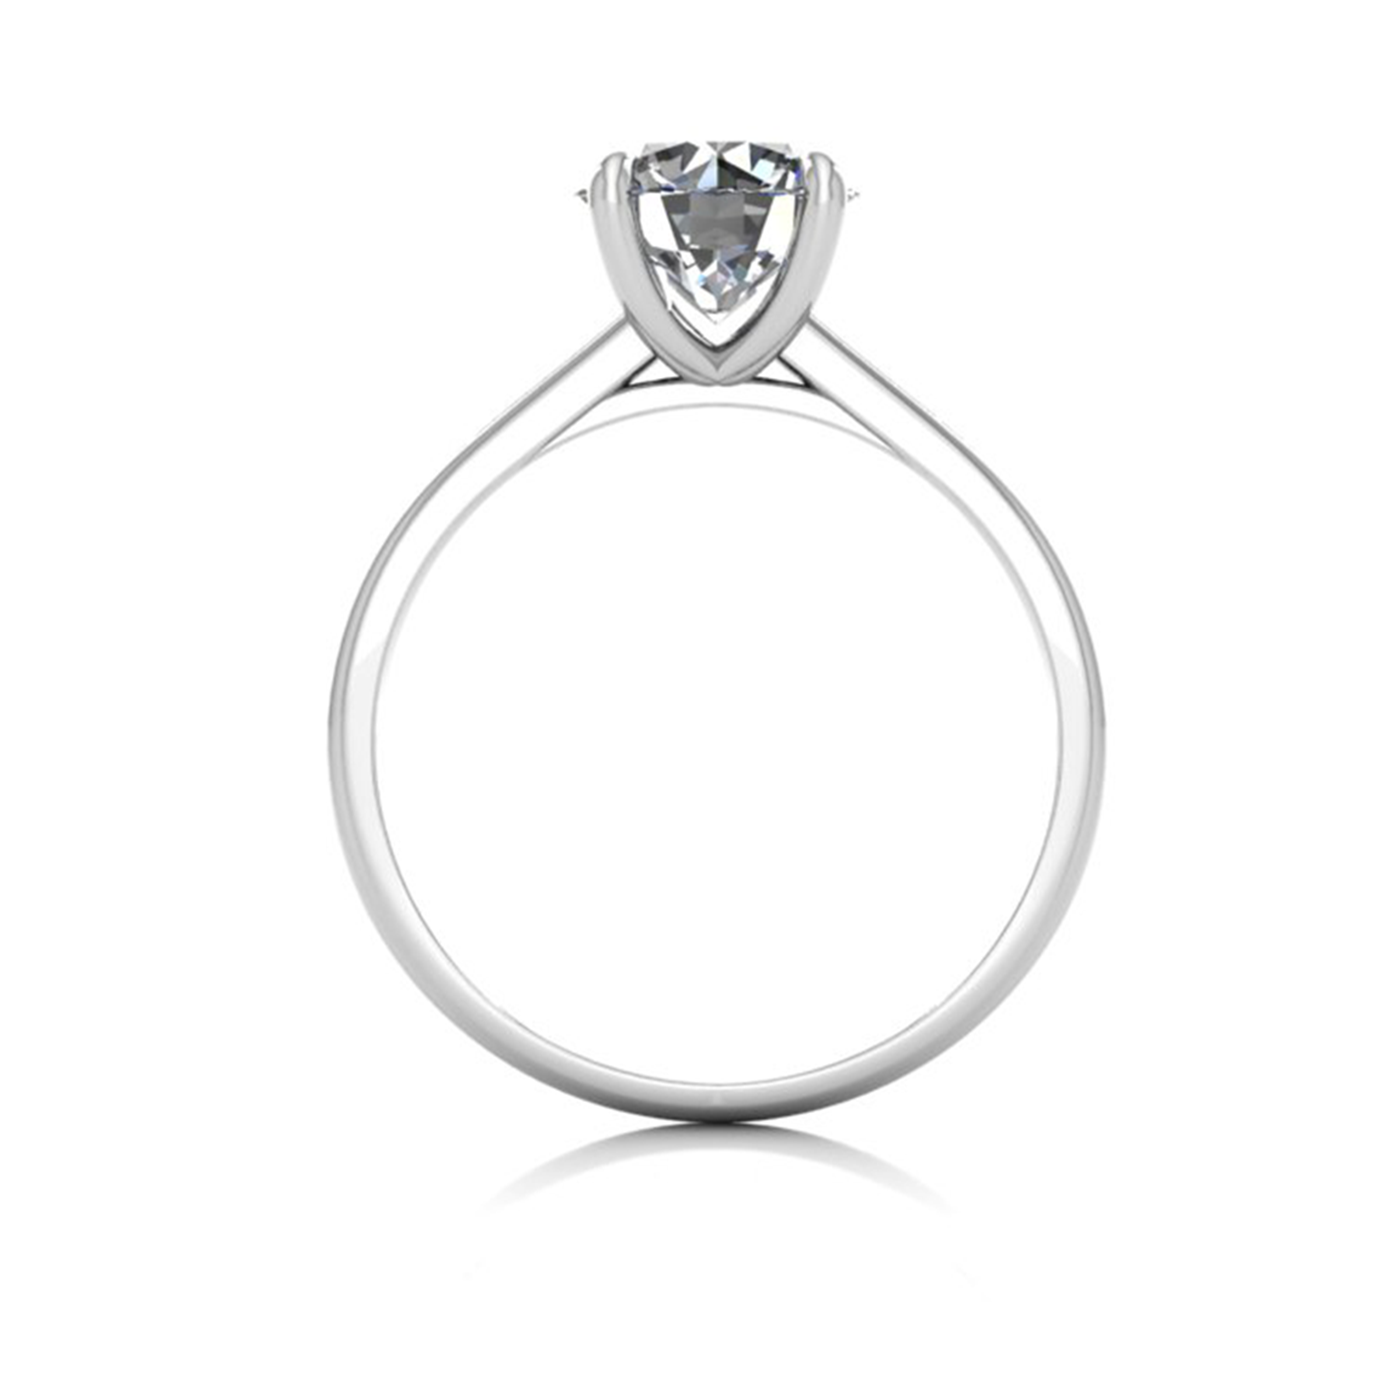 18k white gold 1.5ct 4 prongs solitaire round cut diamond engagement ring with whisper thin band